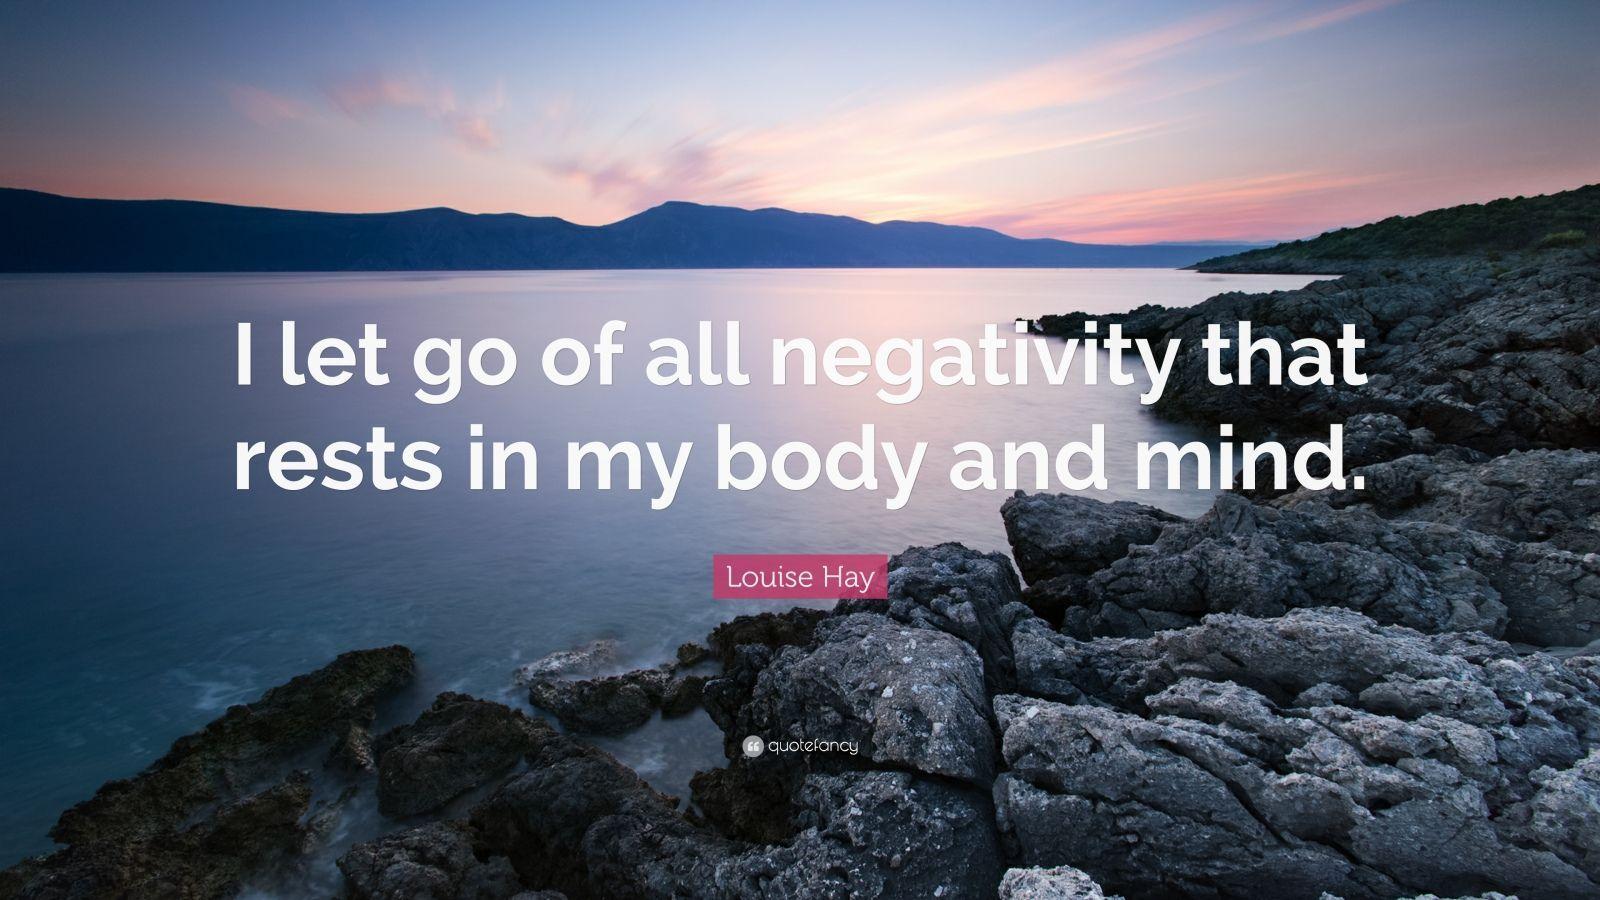 Louise Hay Quotes (100 wallpaper)